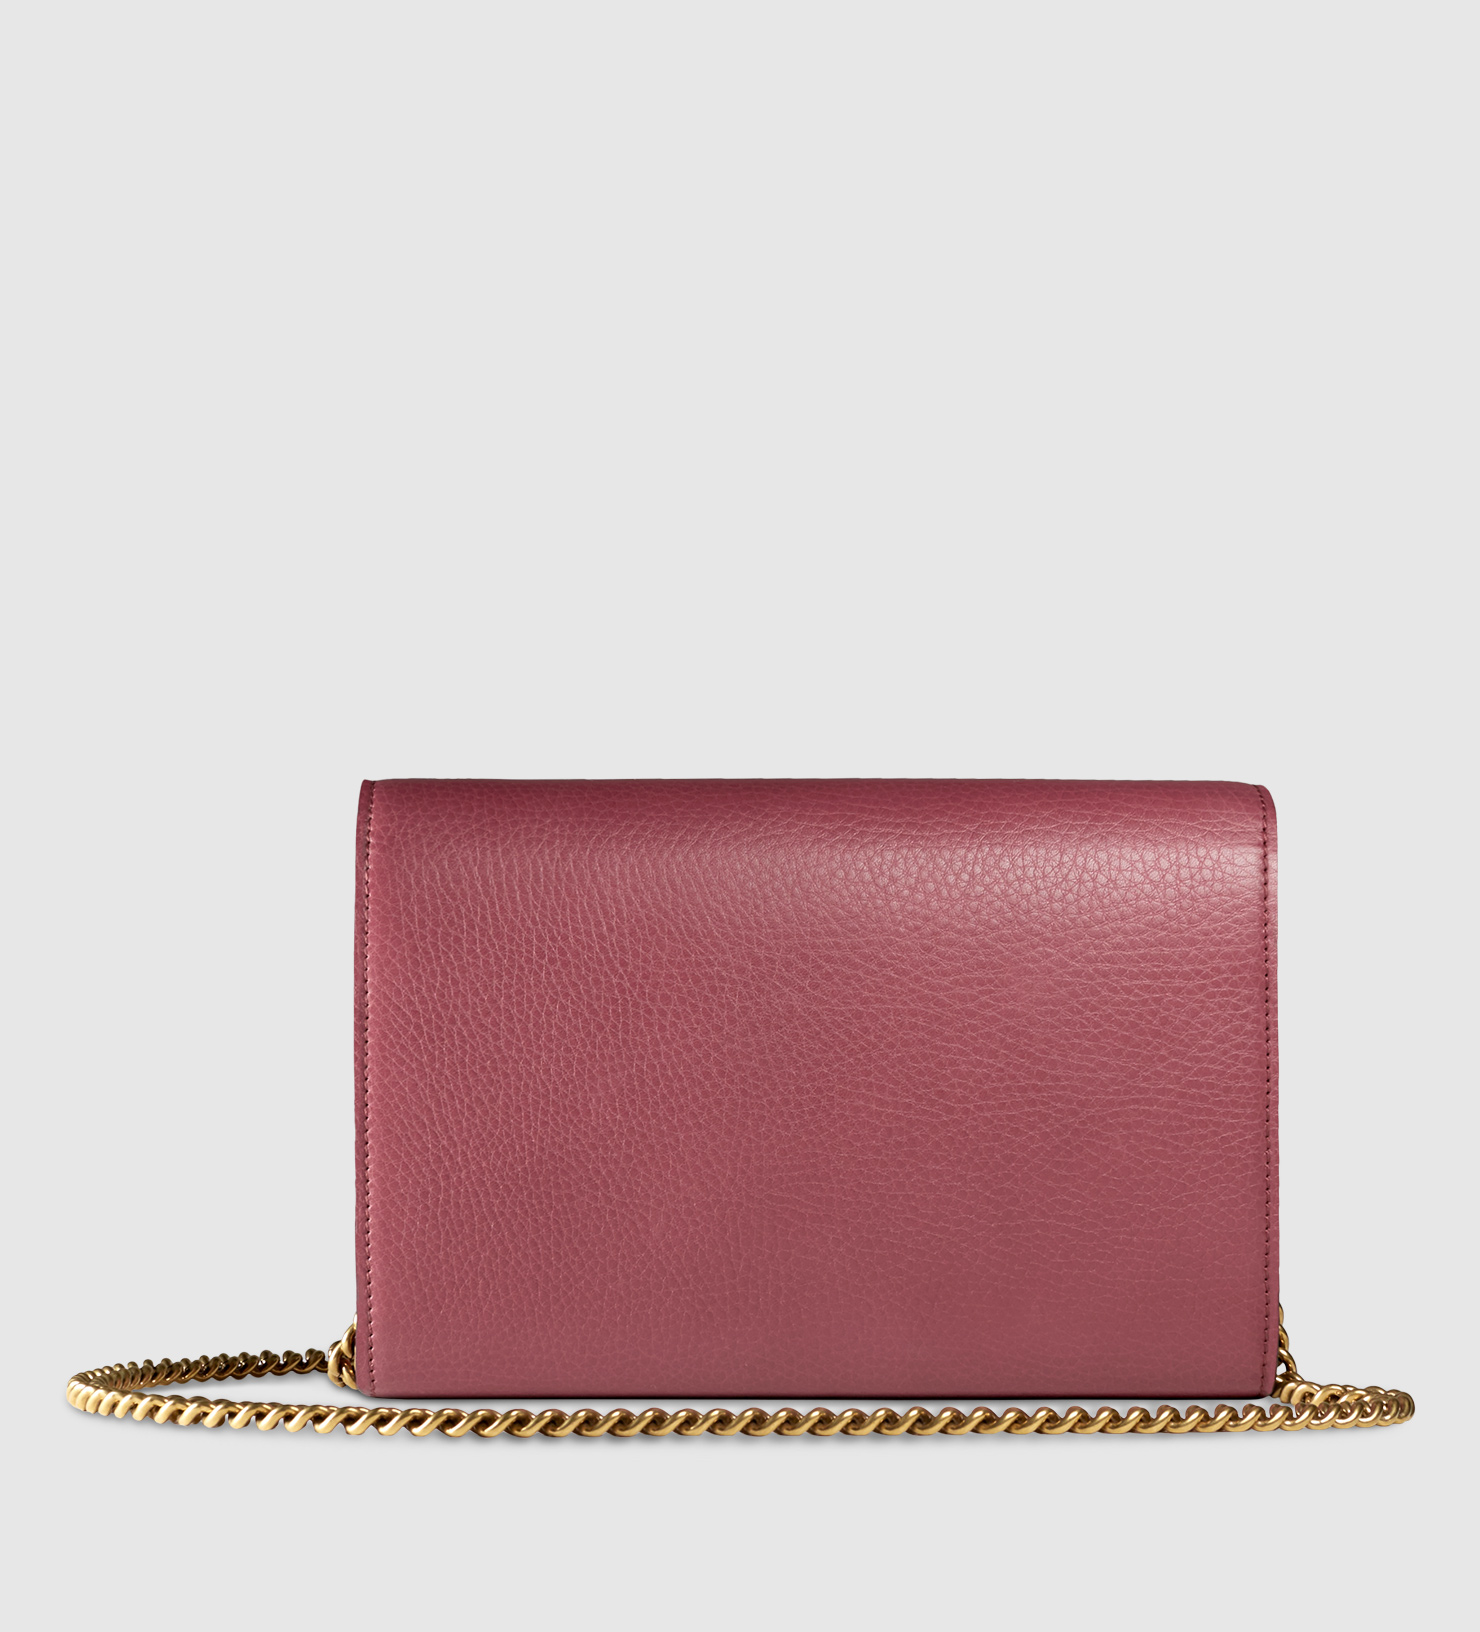 Lyst - Gucci Gg Marmont Leather Chain Wallet in Purple